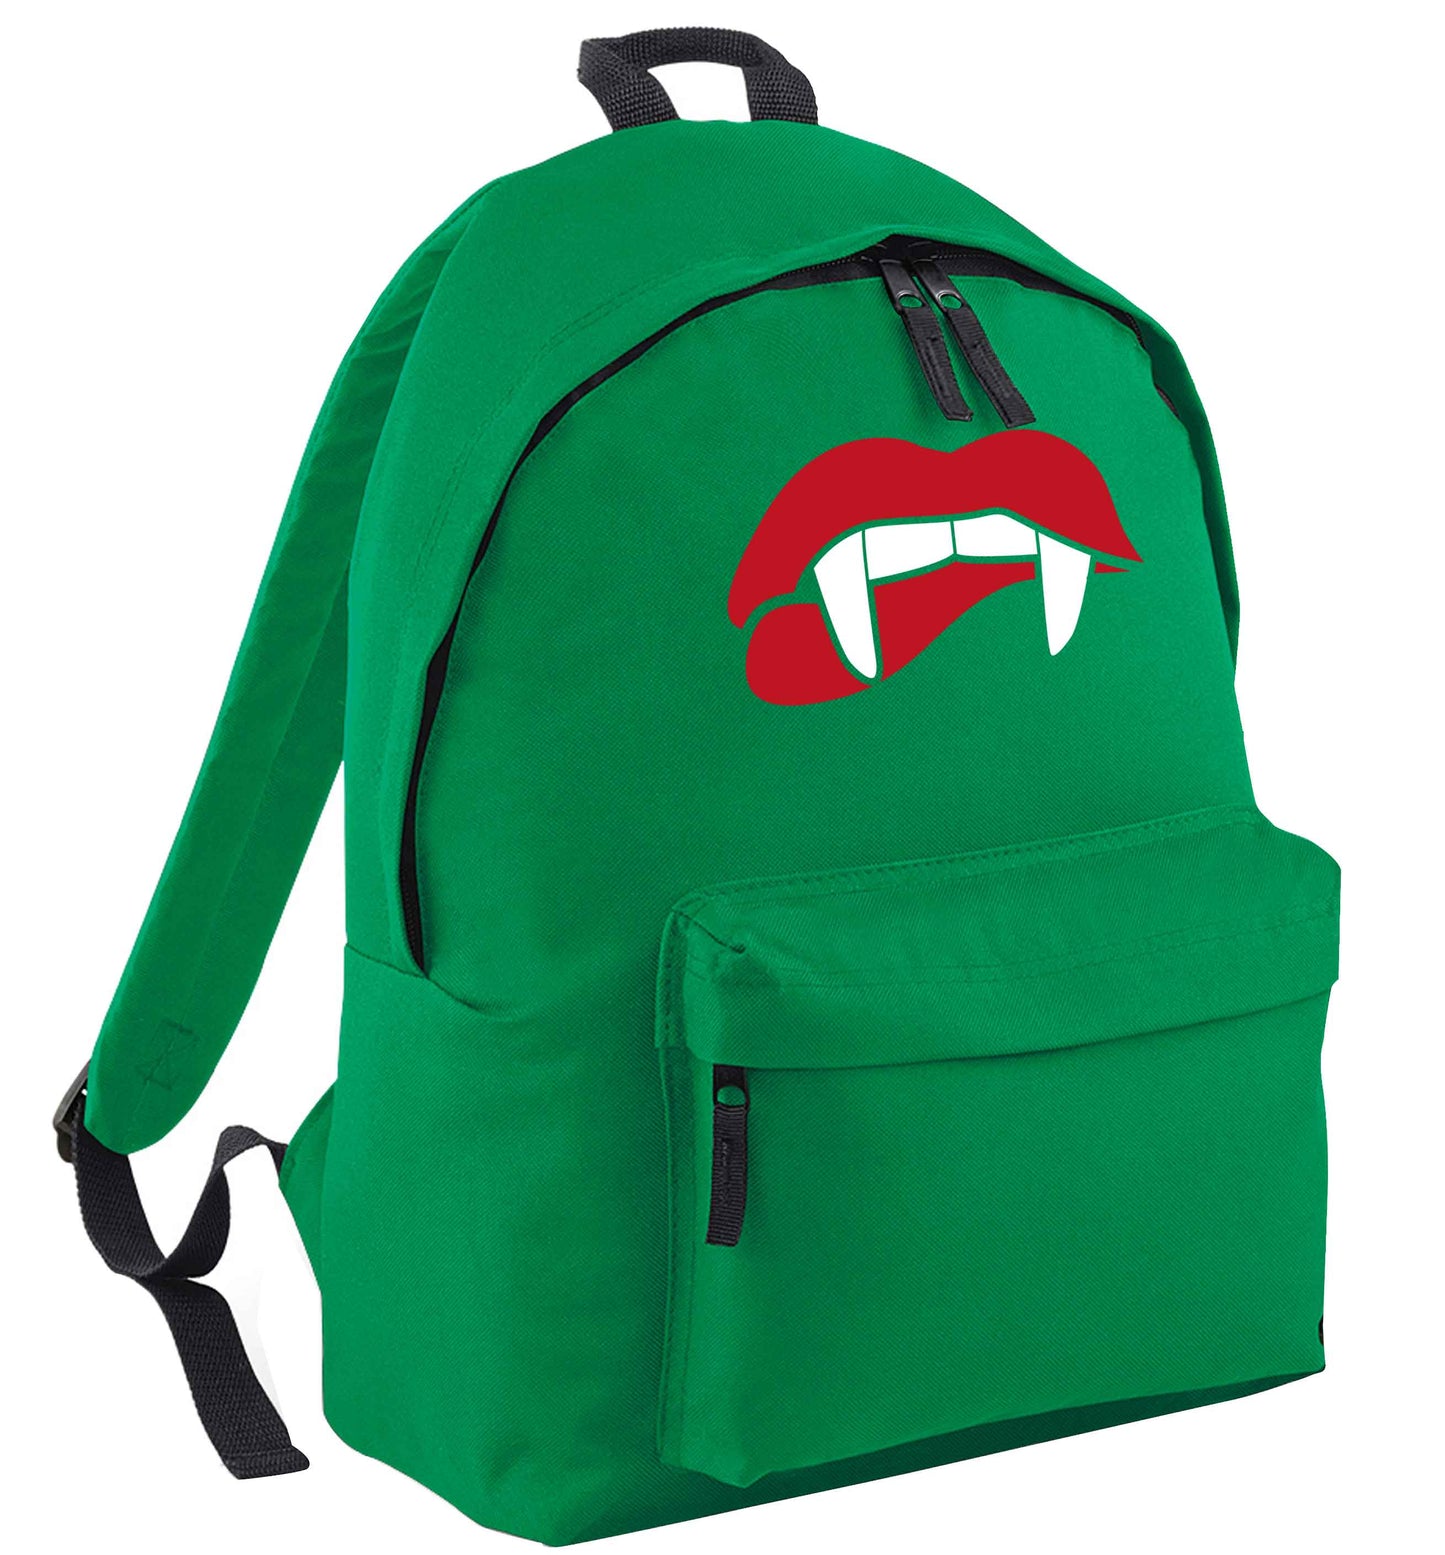 Vampire fangs green adults backpack